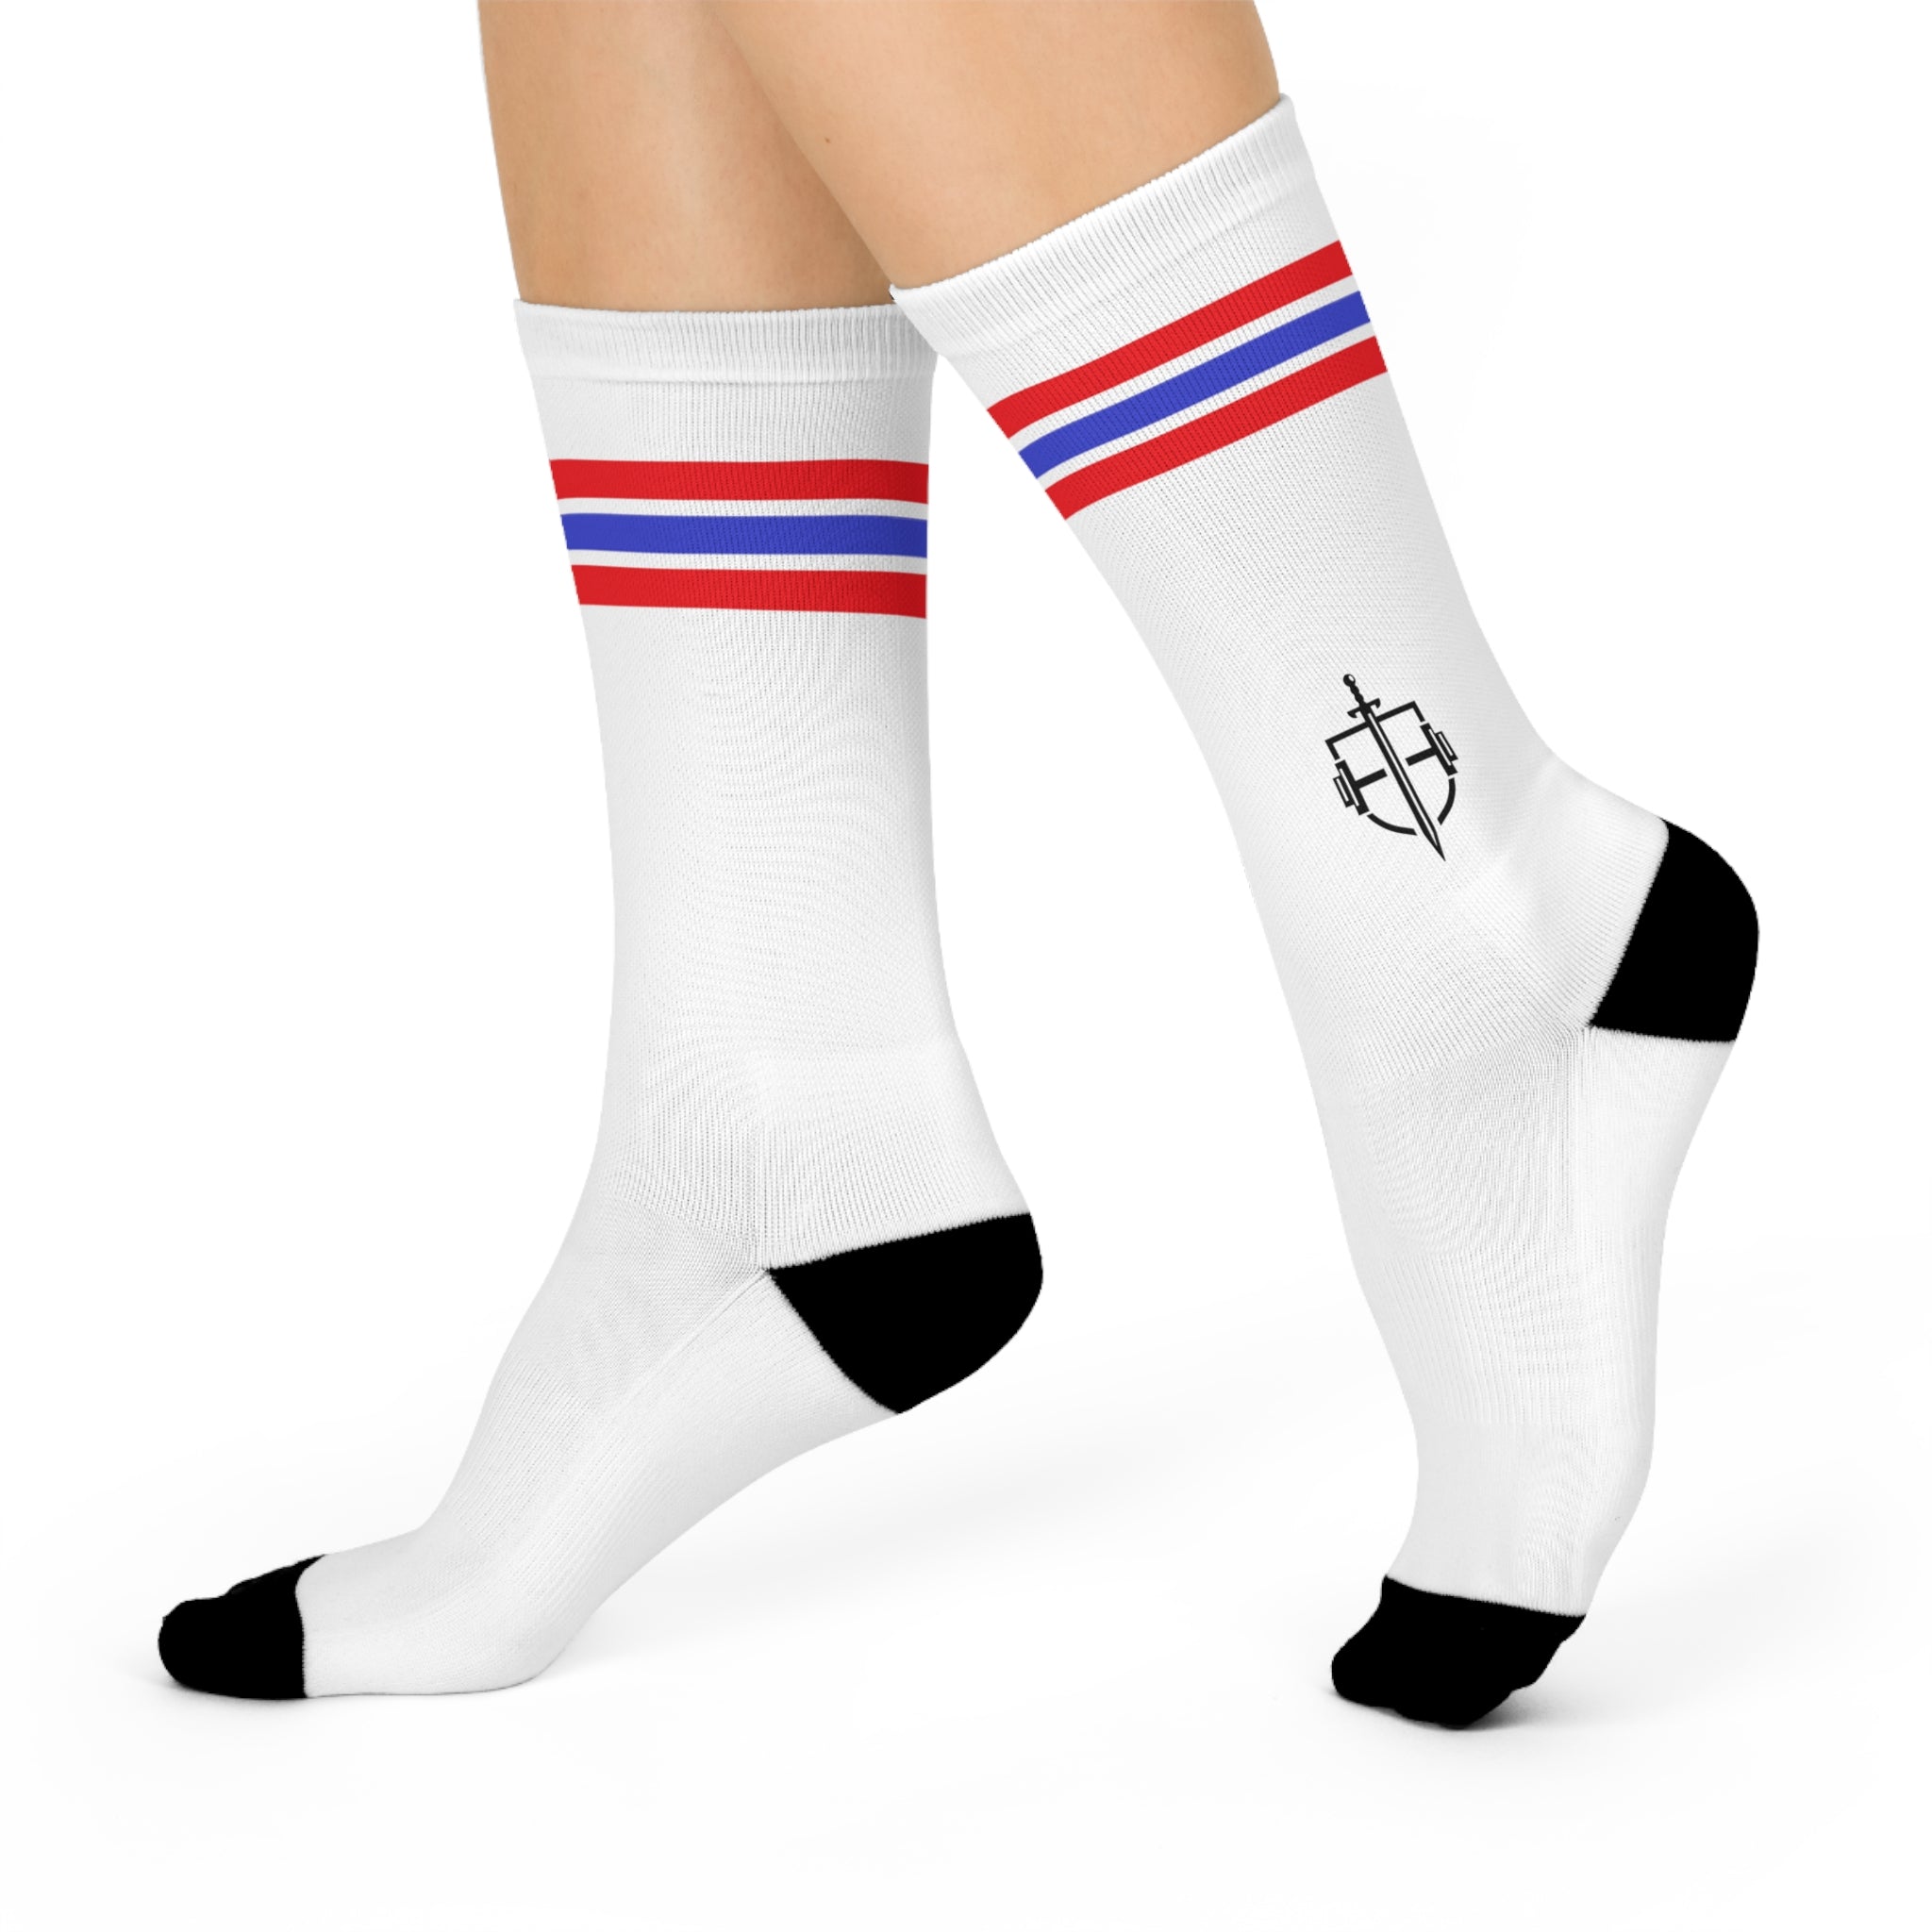 Impress'D Clothing 12 Pairs White Unisex Crew Socks with Two Red Stripes Classic Retro Old School